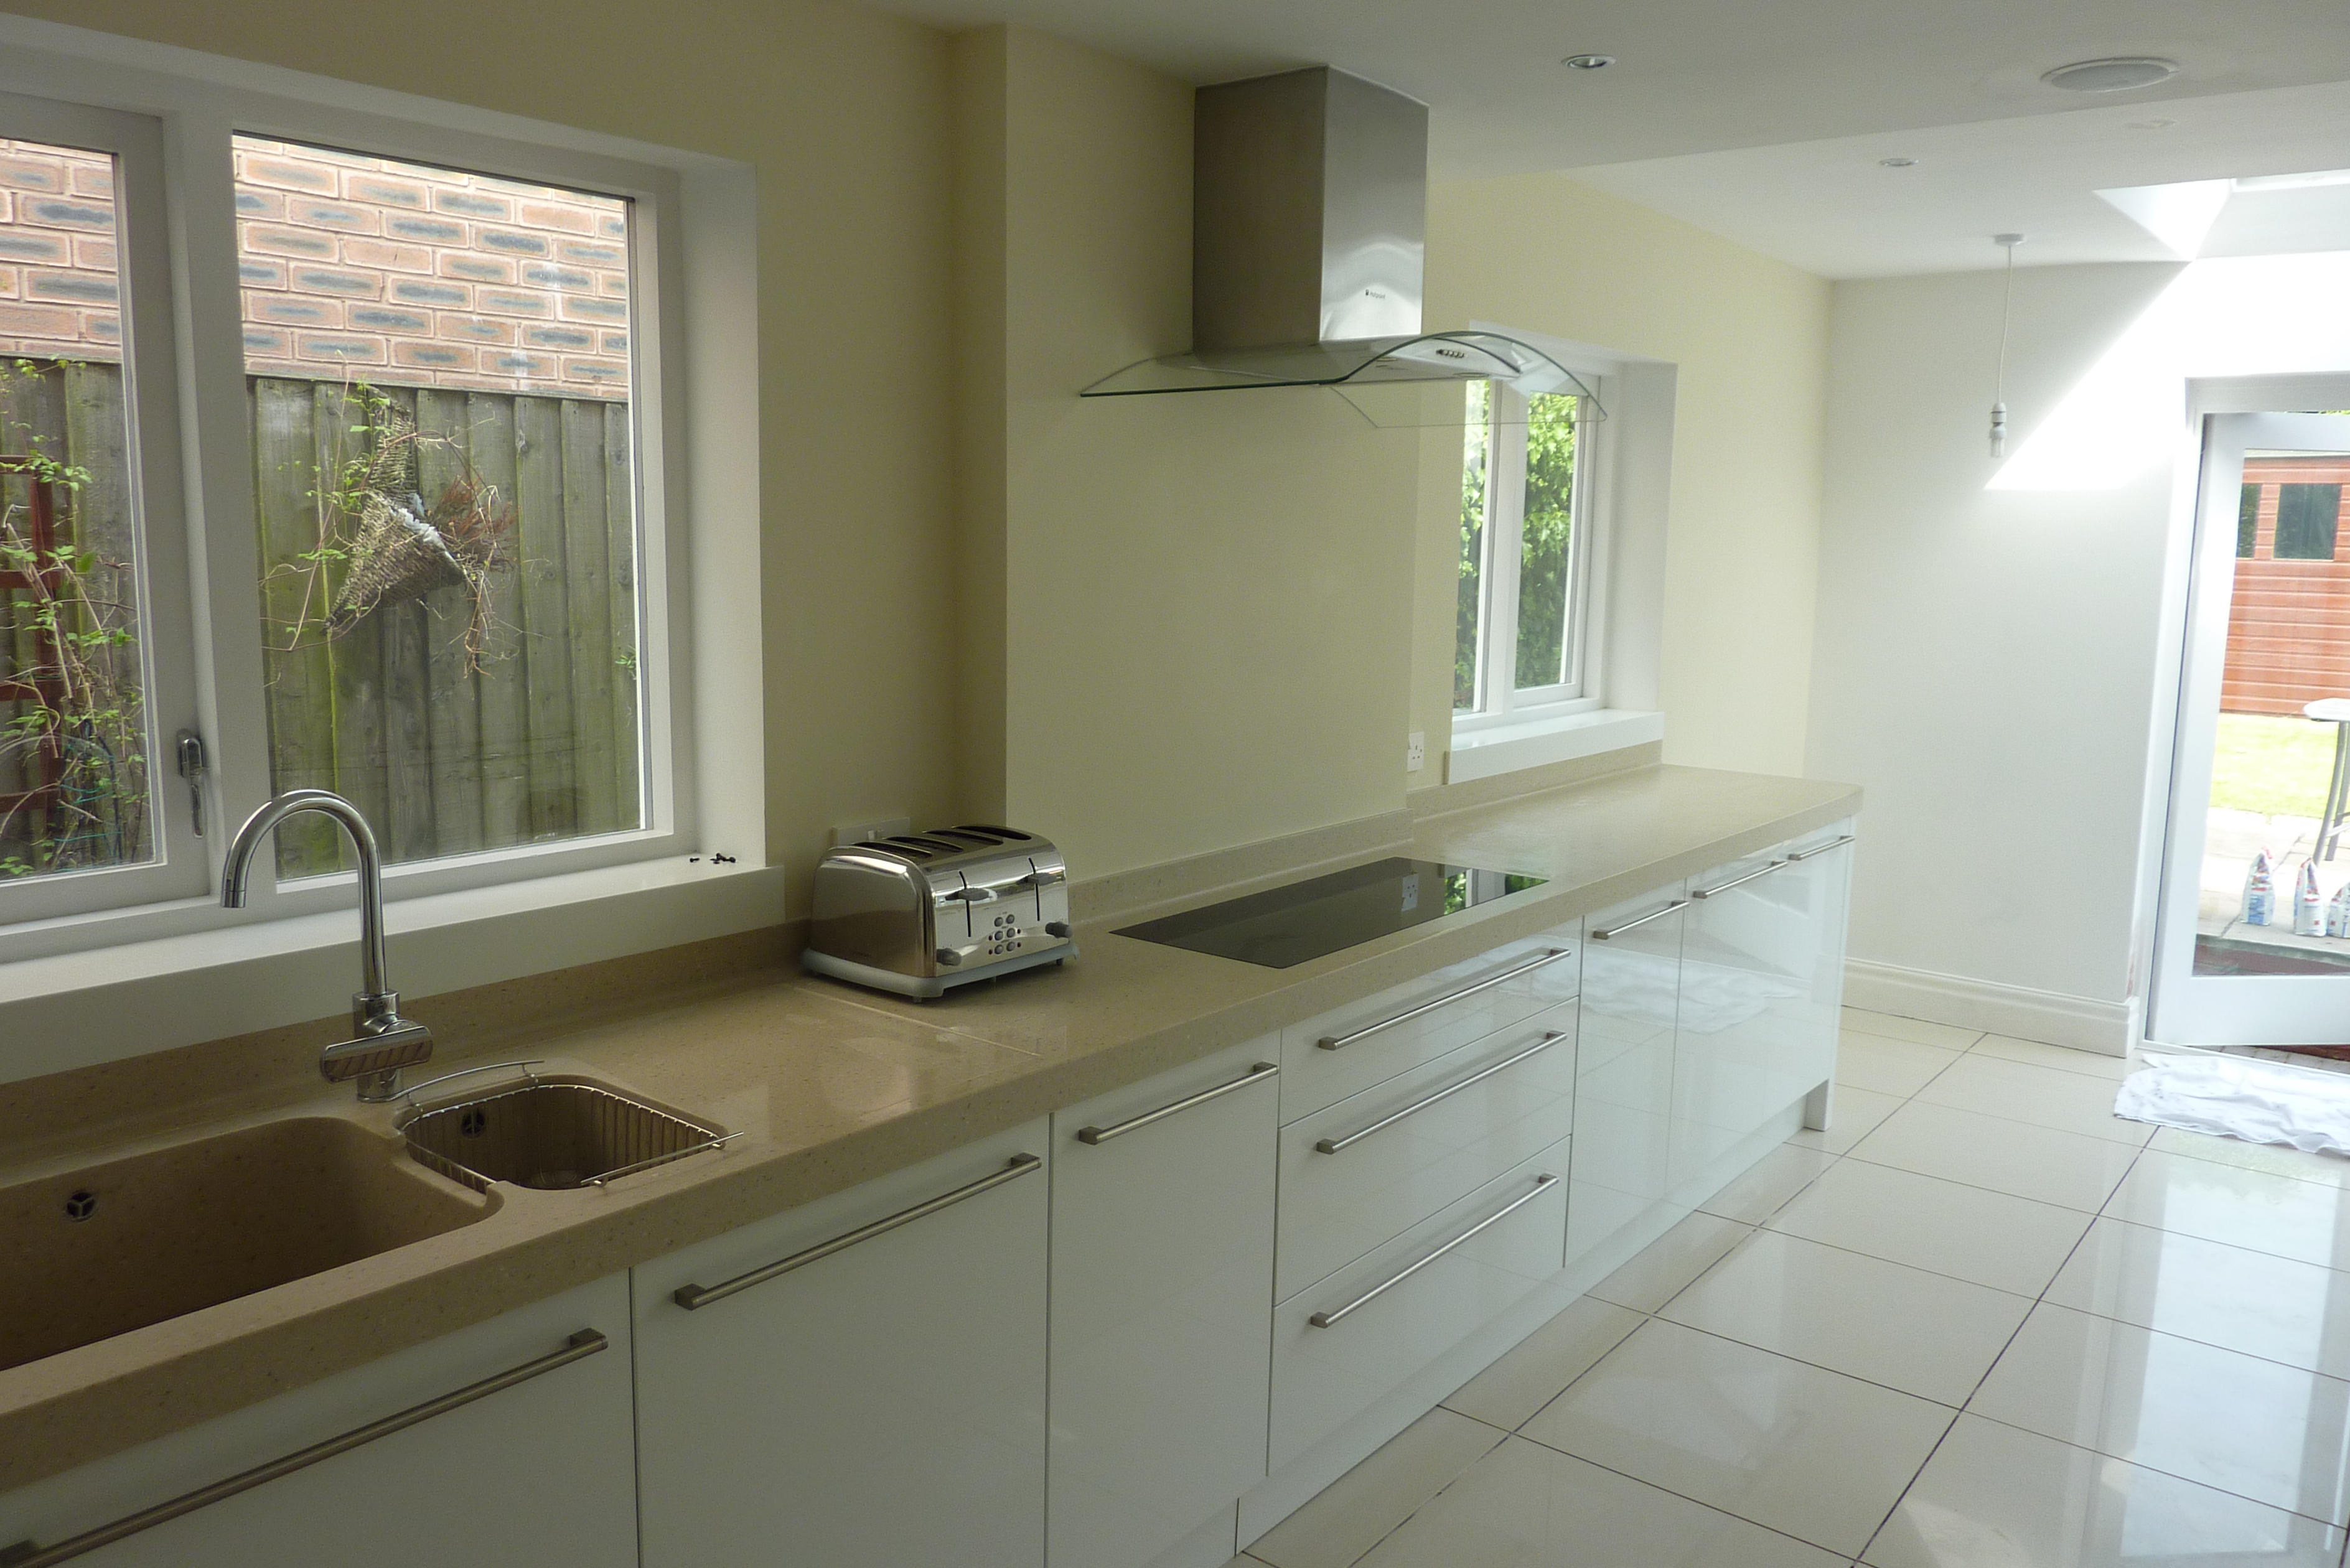 Corian worktops with coved up stands and inset corian sink and corian window sills